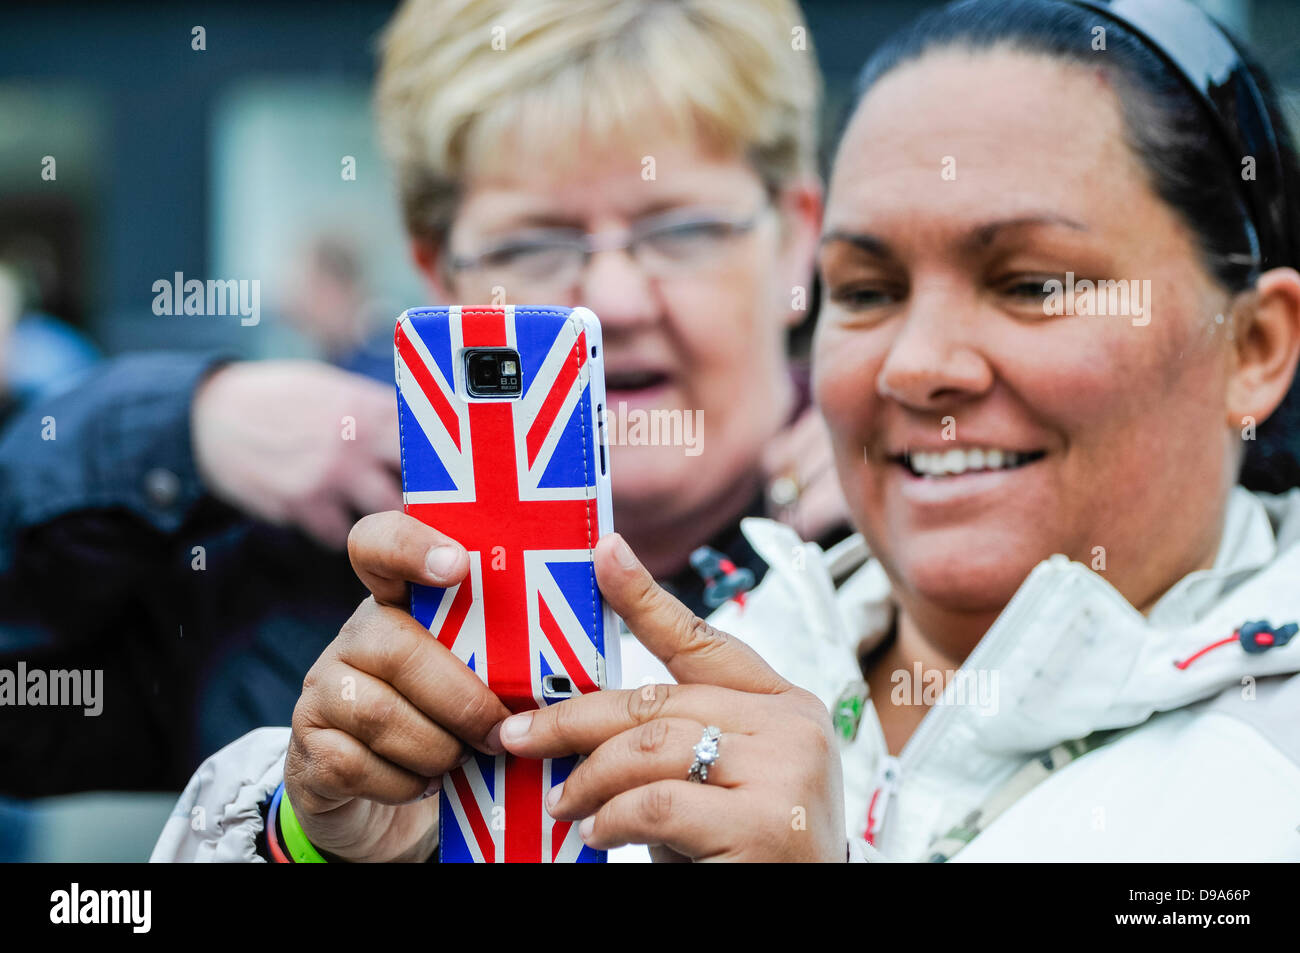 A woman takes a photograph using a mobile phone with a [upside down] Union Jack flag case Stock Photo